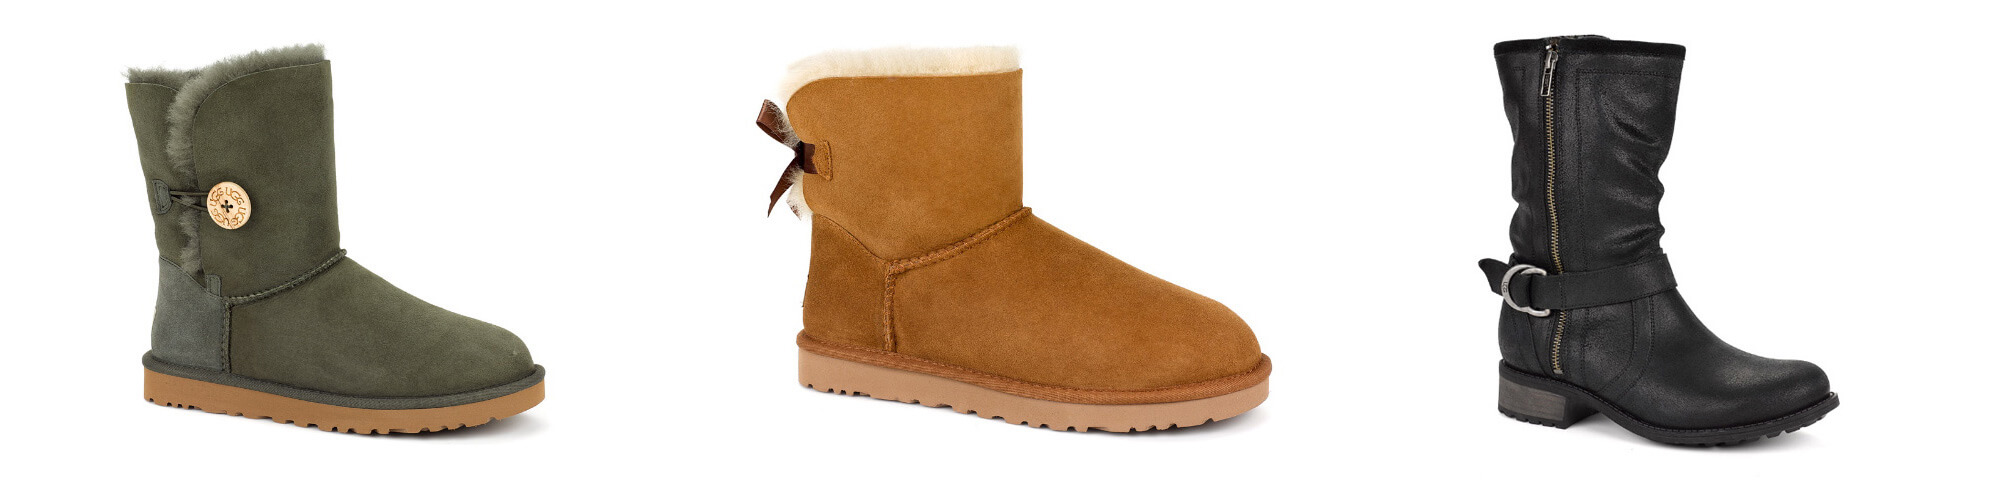 UGG bei Marie Claire Fashion